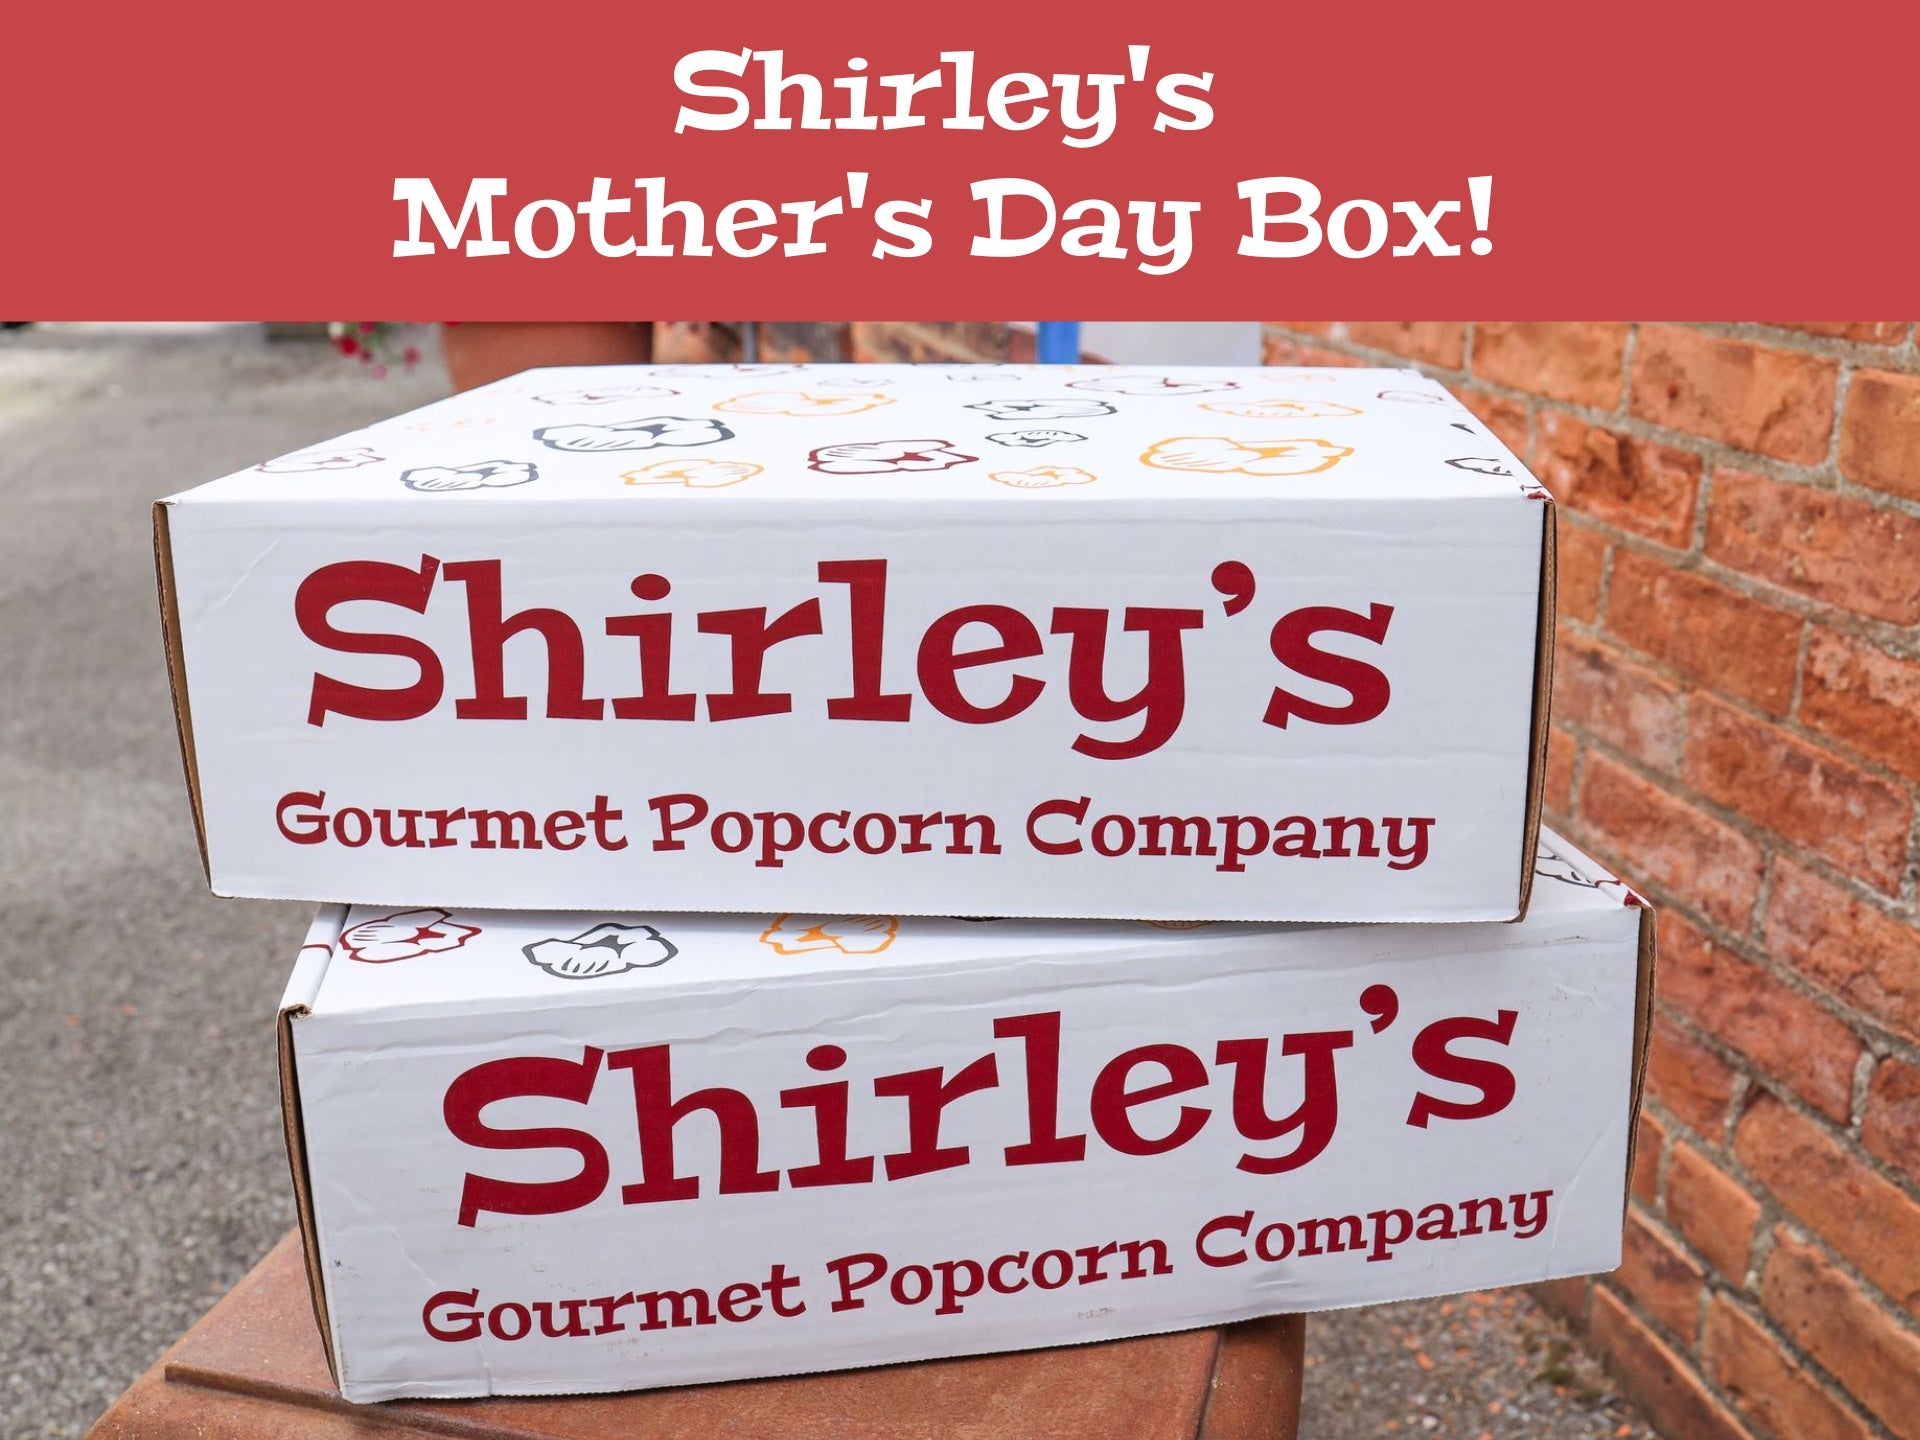 Shirley's Mother's Day Box! (FREE SHIPPING)